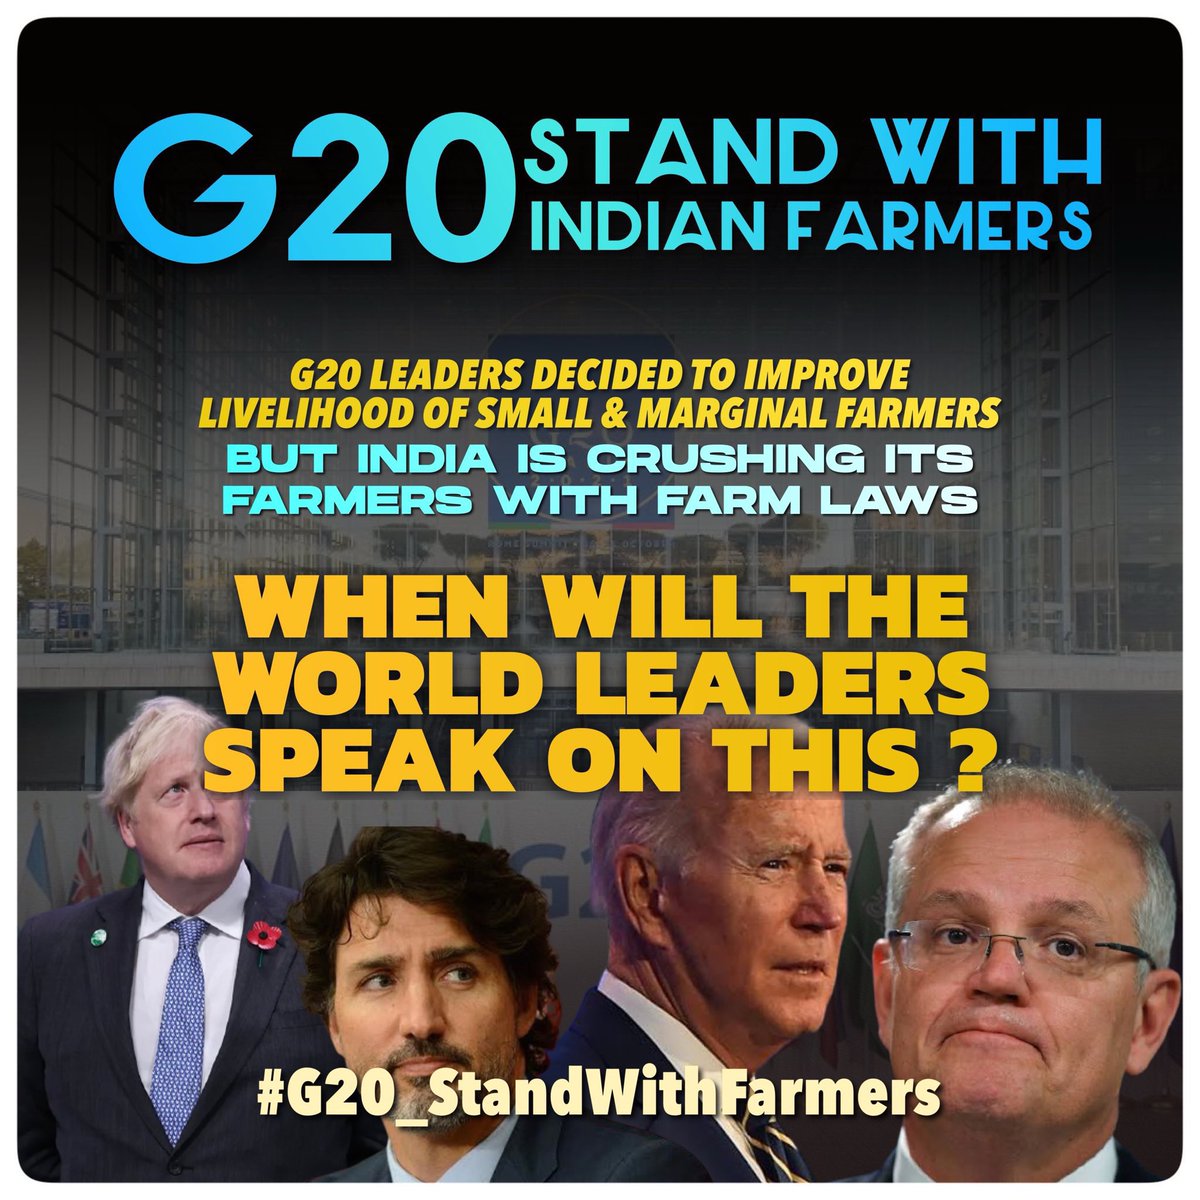 RT @farmer19844: World' leaders should take stand with Farmers 
#G20_StandWithFarmers https://t.co/gB9V6bYIUf